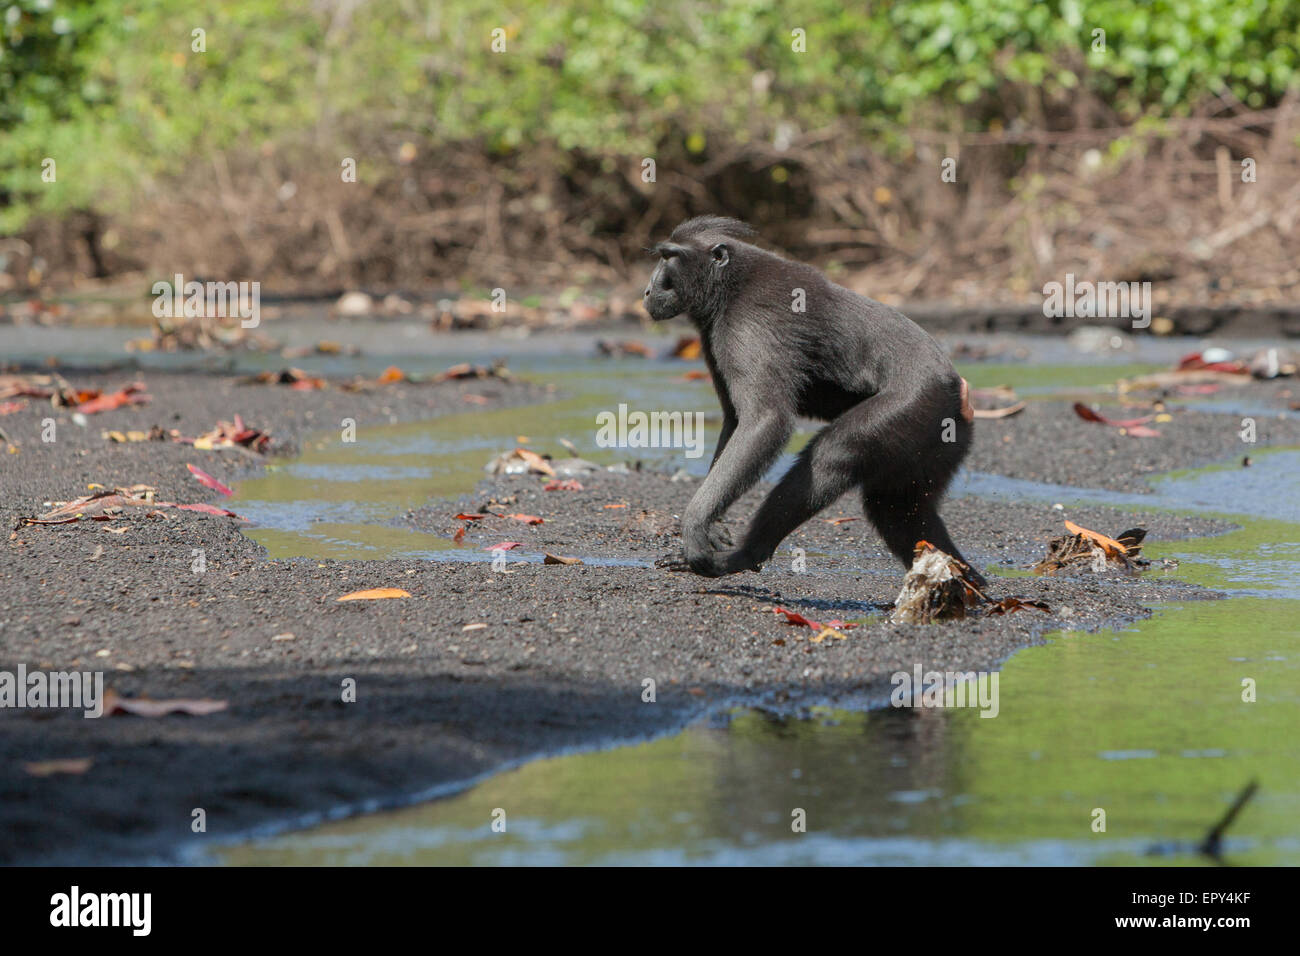 A Sulawesi crested macaque (Macaca nigra) walks bipedally as it is foraging on a stream near a beach in Tangkoko forest, North Sulawesi, Indonesia. Stock Photo